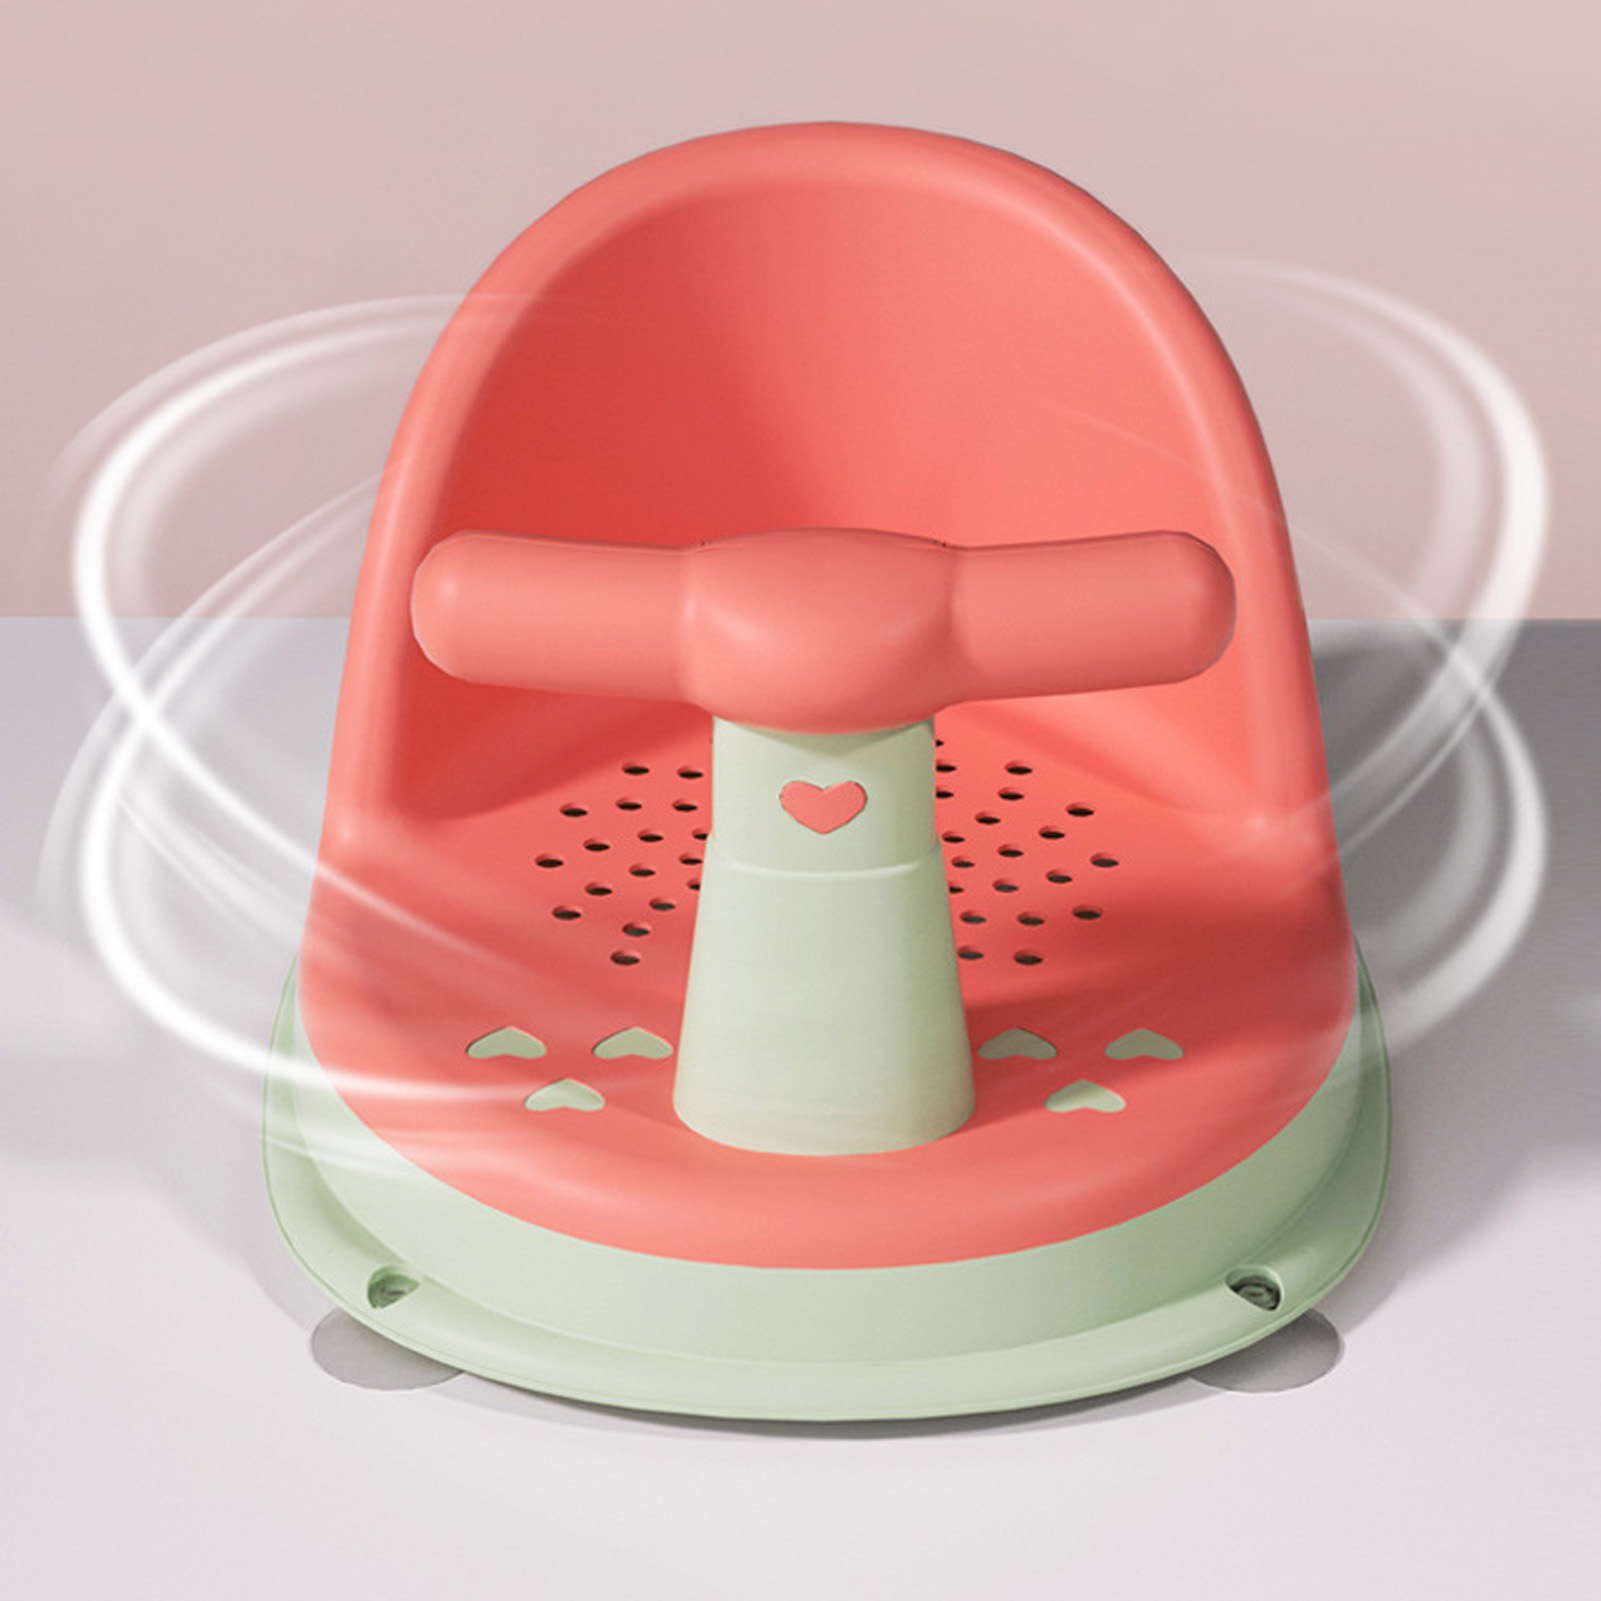 Baby Bath Chair Adjustable Prevent Slip Baby Bath Seat Comfortable for